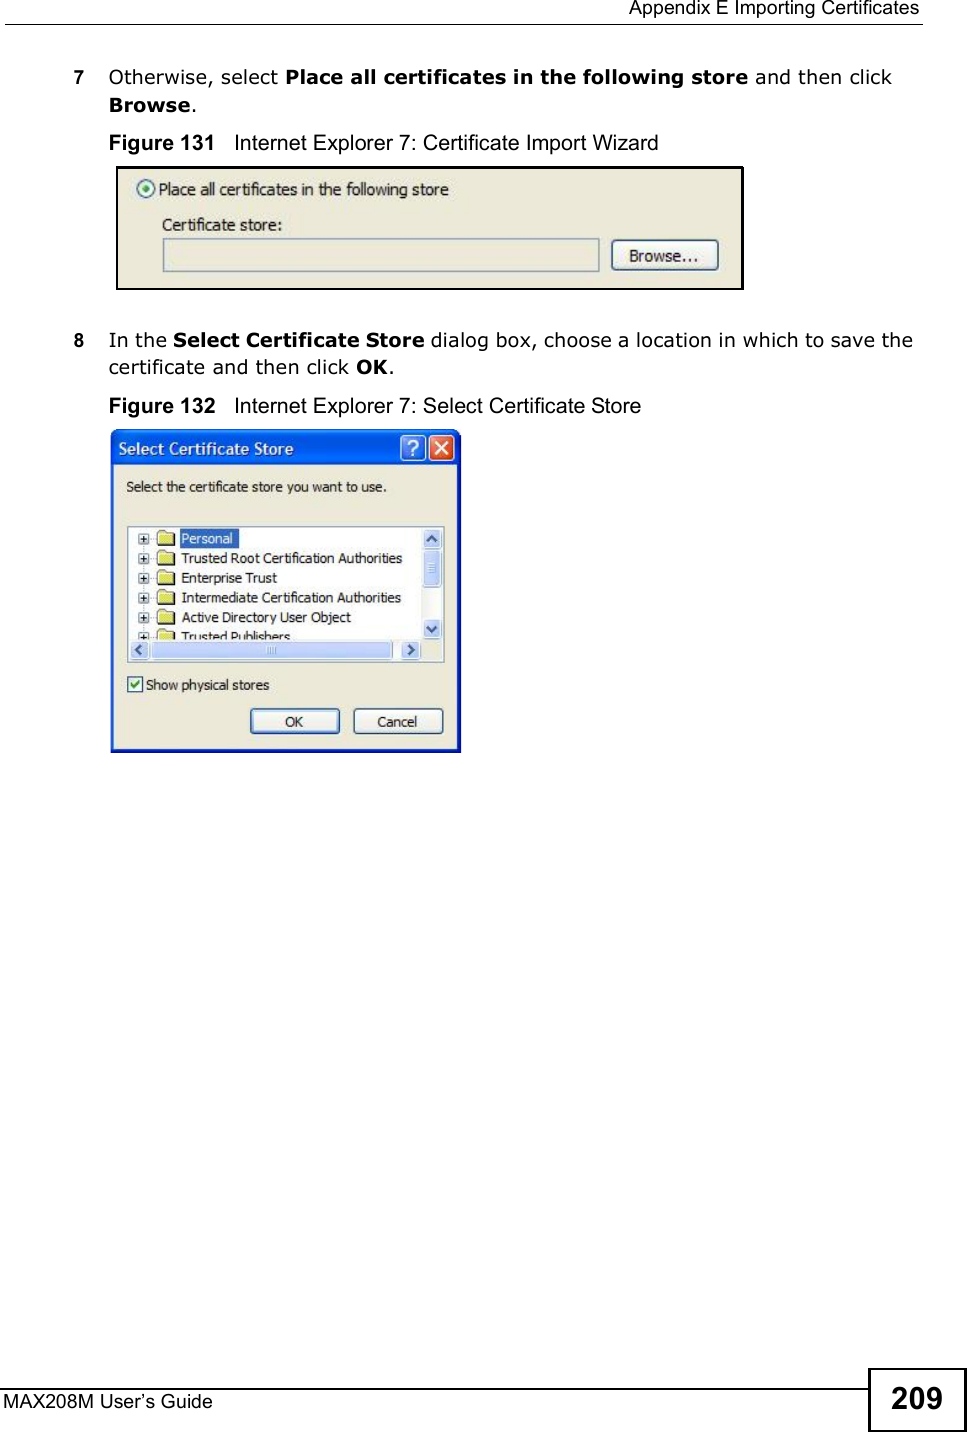  Appendix EImporting CertificatesMAX208M User s Guide 2097Otherwise, select Place all certificates in the following store and then click Browse.Figure 131   Internet Explorer 7: Certificate Import Wizard8In the Select Certificate Store dialog box, choose a location in which to save the certificate and then click OK.Figure 132   Internet Explorer 7: Select Certificate Store